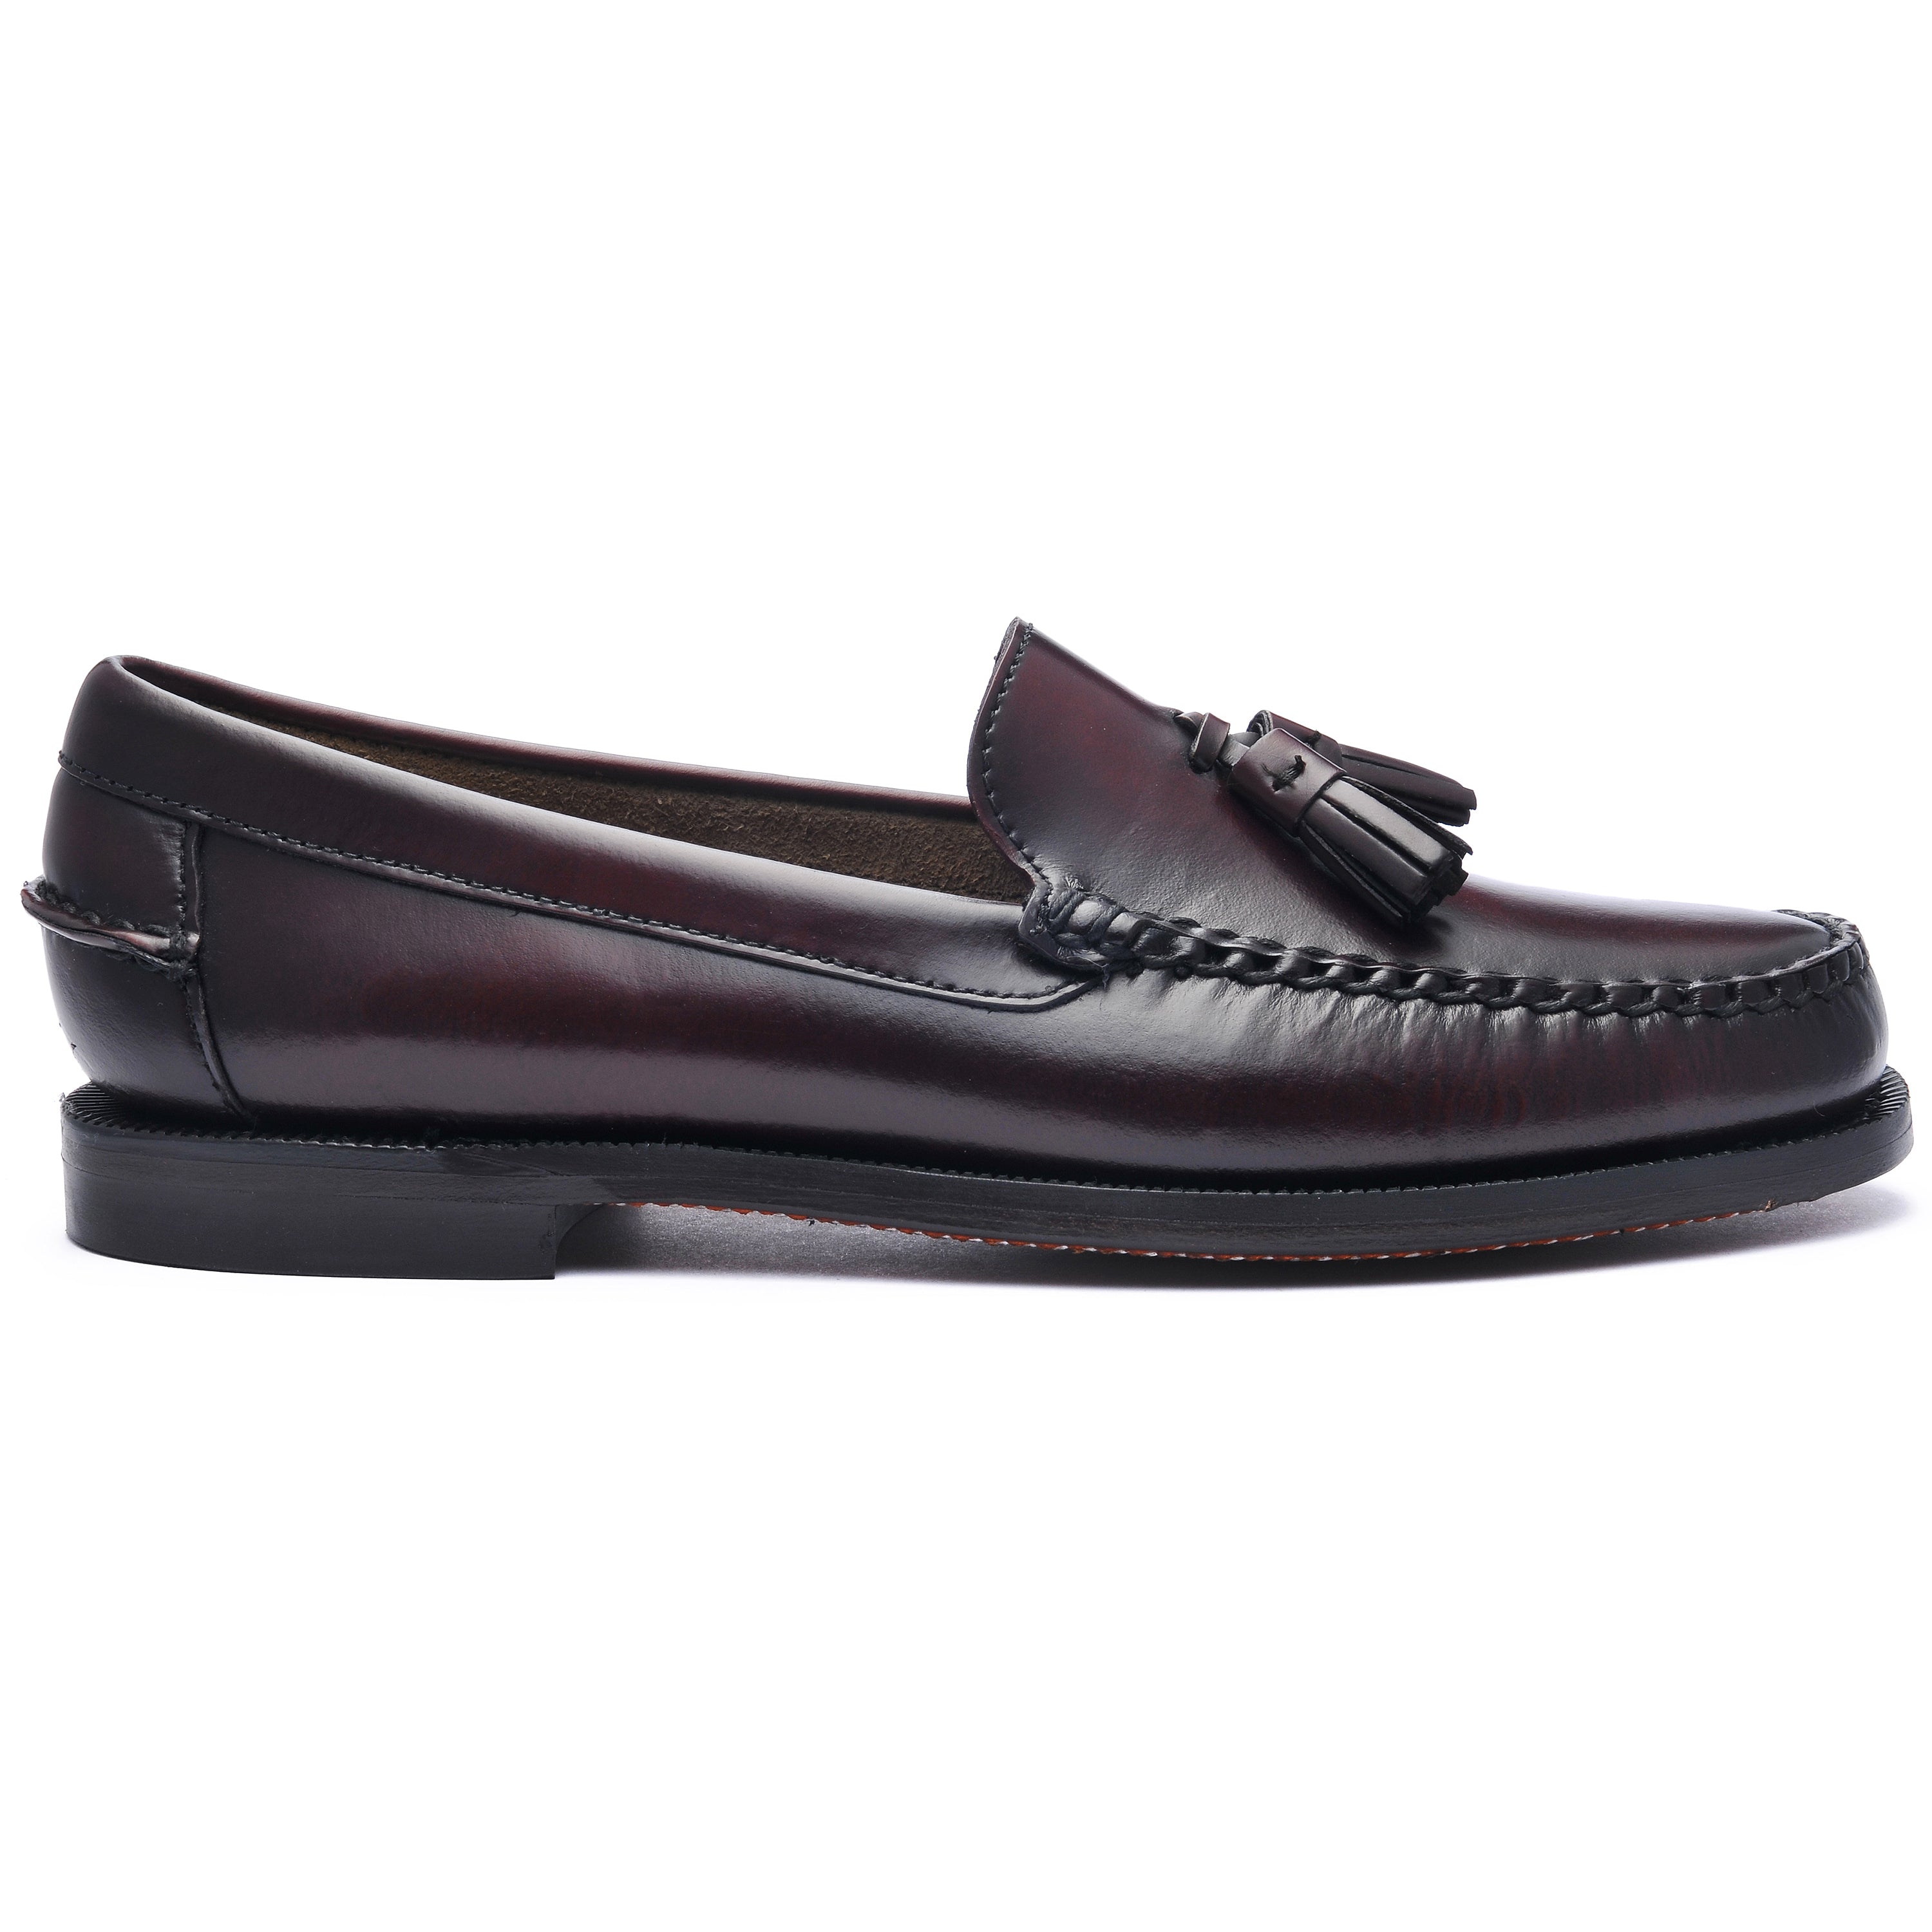 Women's Loafers | Citysides | Classic Will | Brown & Burgundy | Sebago ...